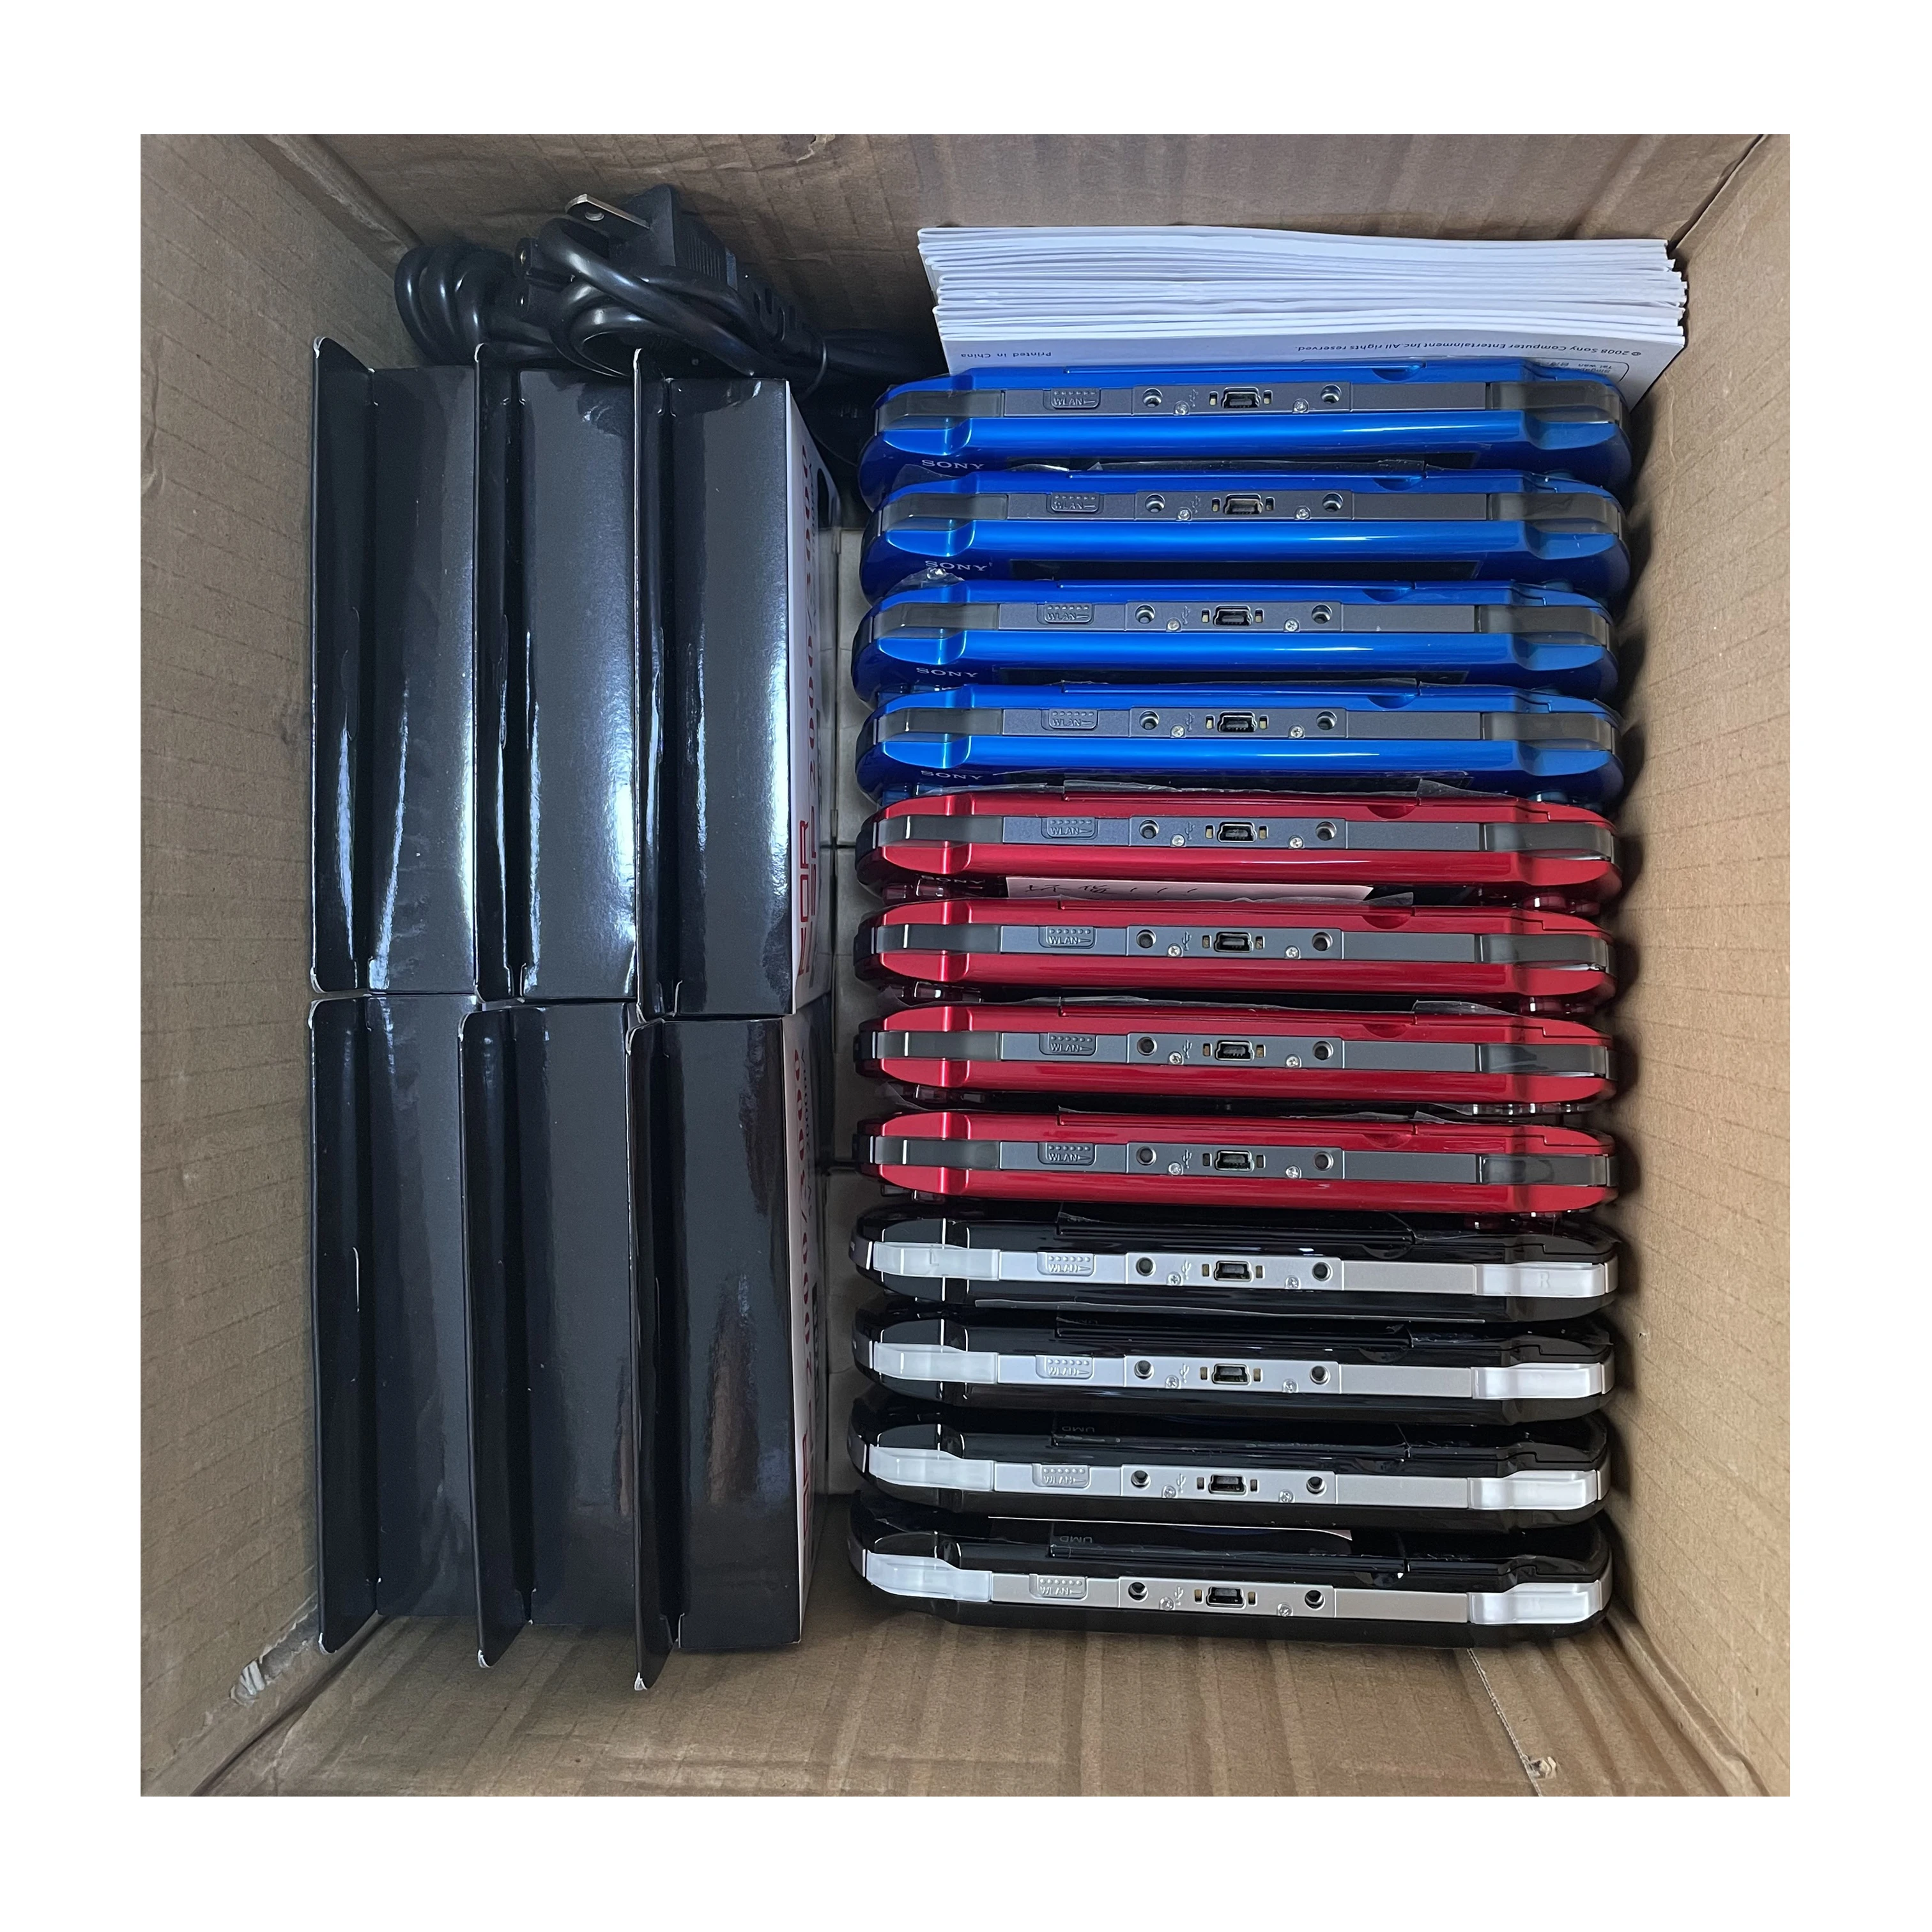 

Free Shipping 10pcs By DHL!!! For PSP 3000 Classic Game Console Handheld Game Player ( Original And Refurbished )